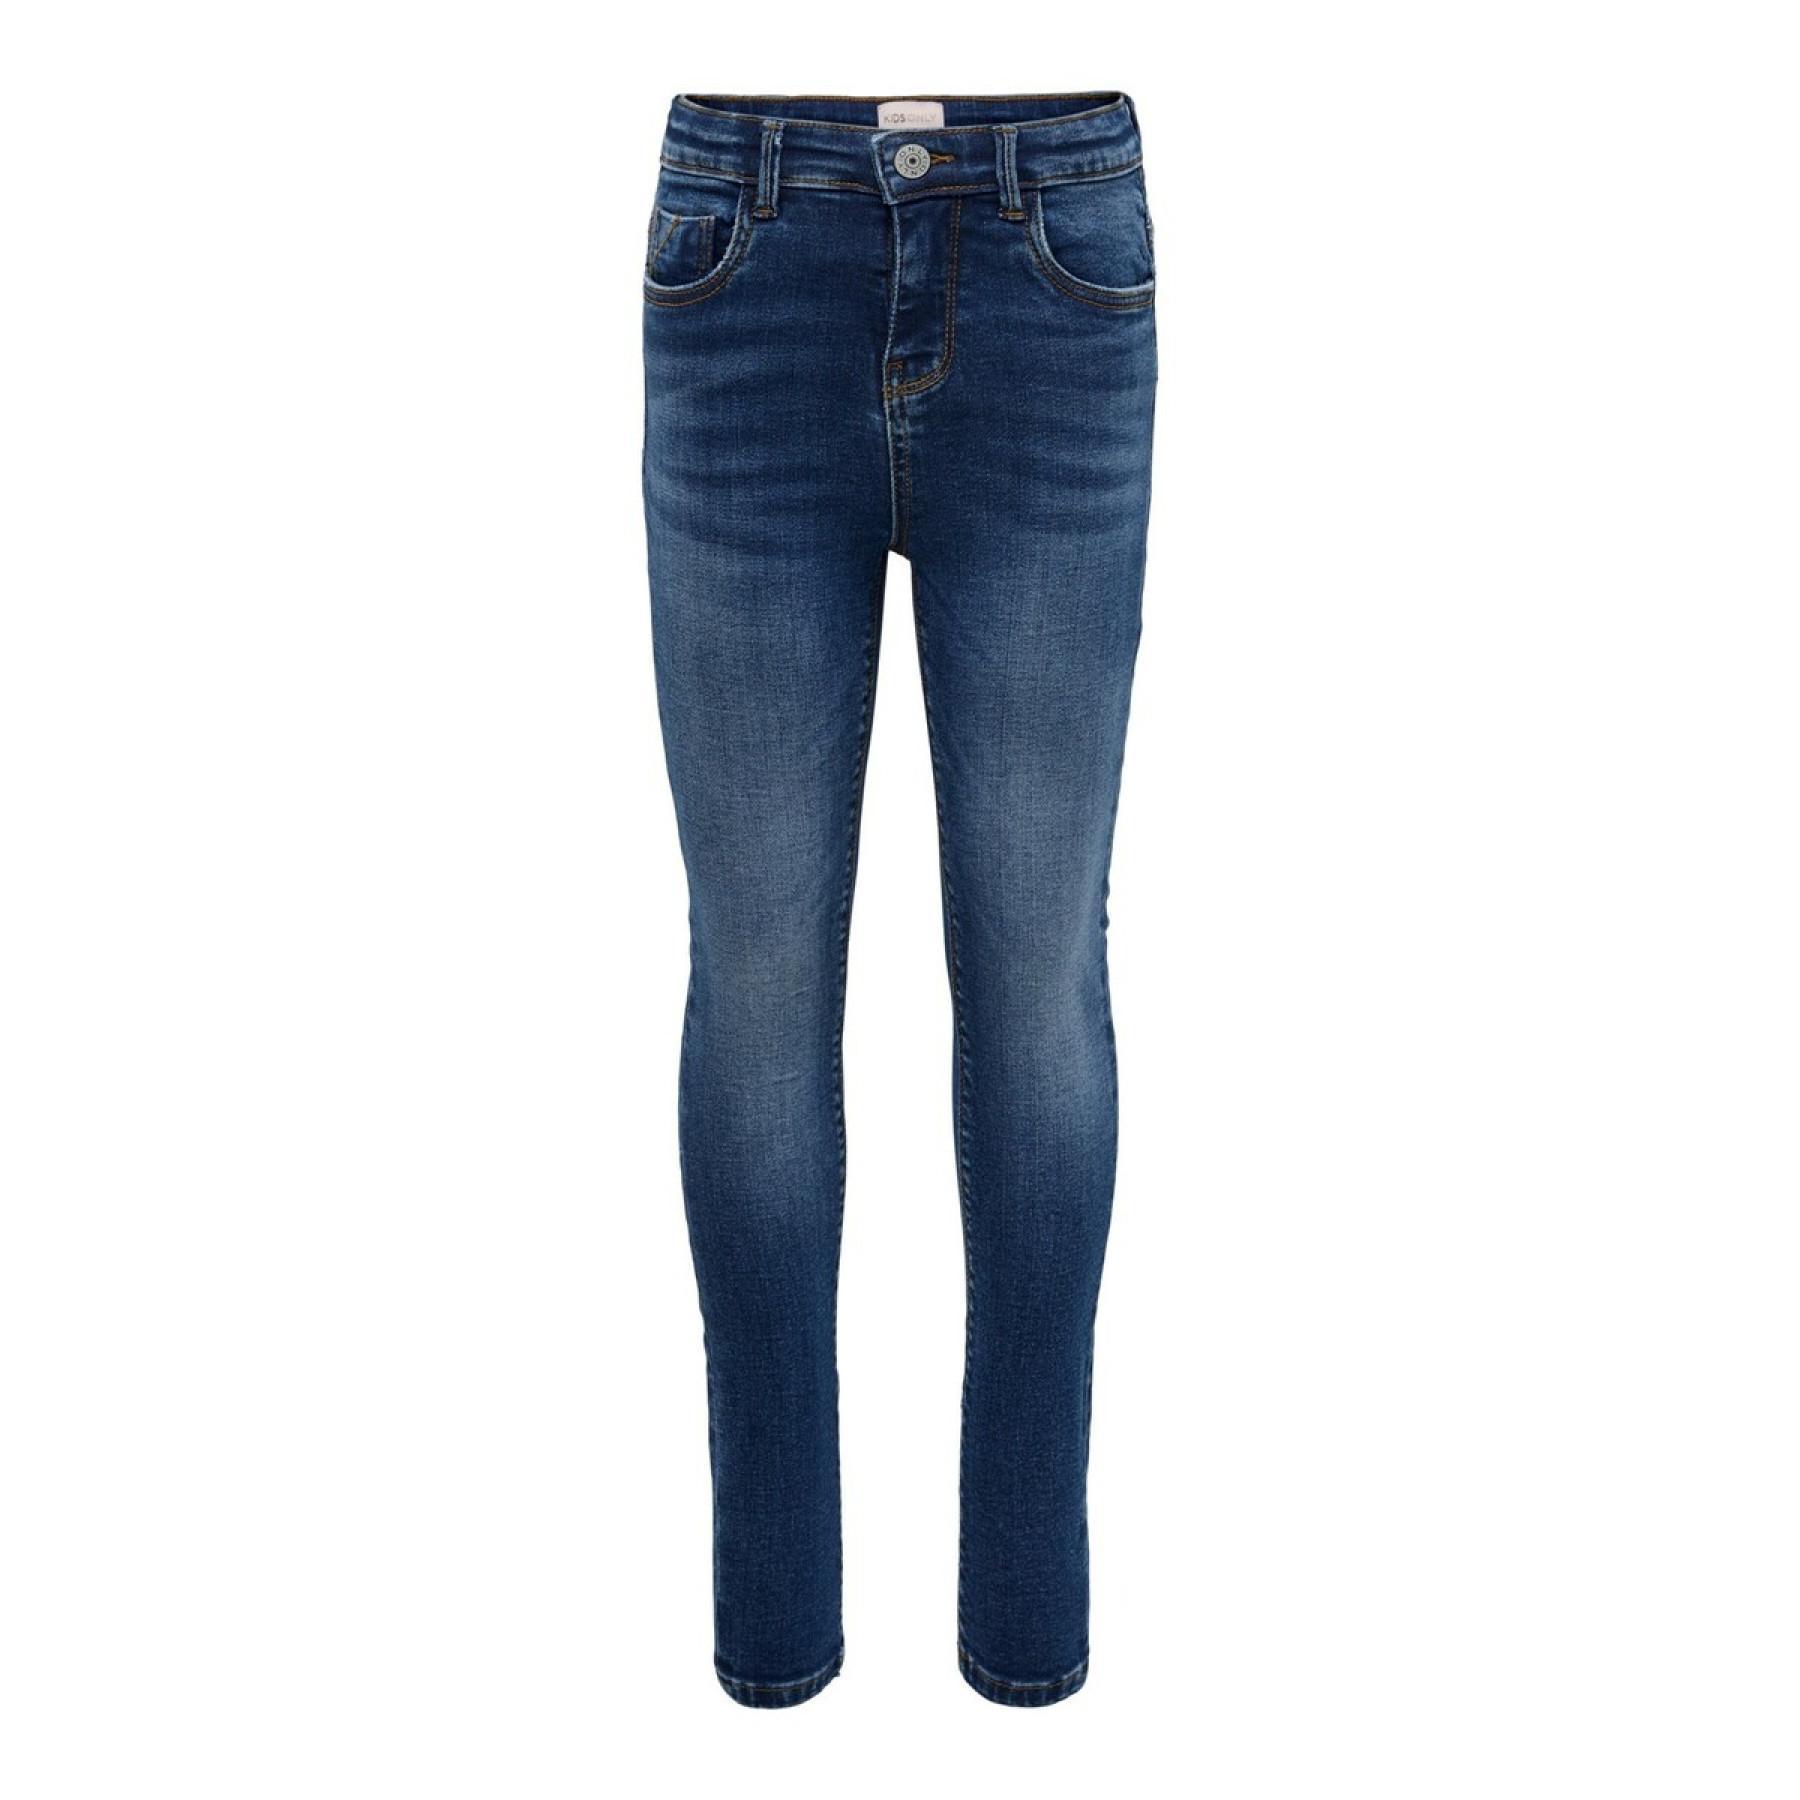 Jeans fille Only kids Paola